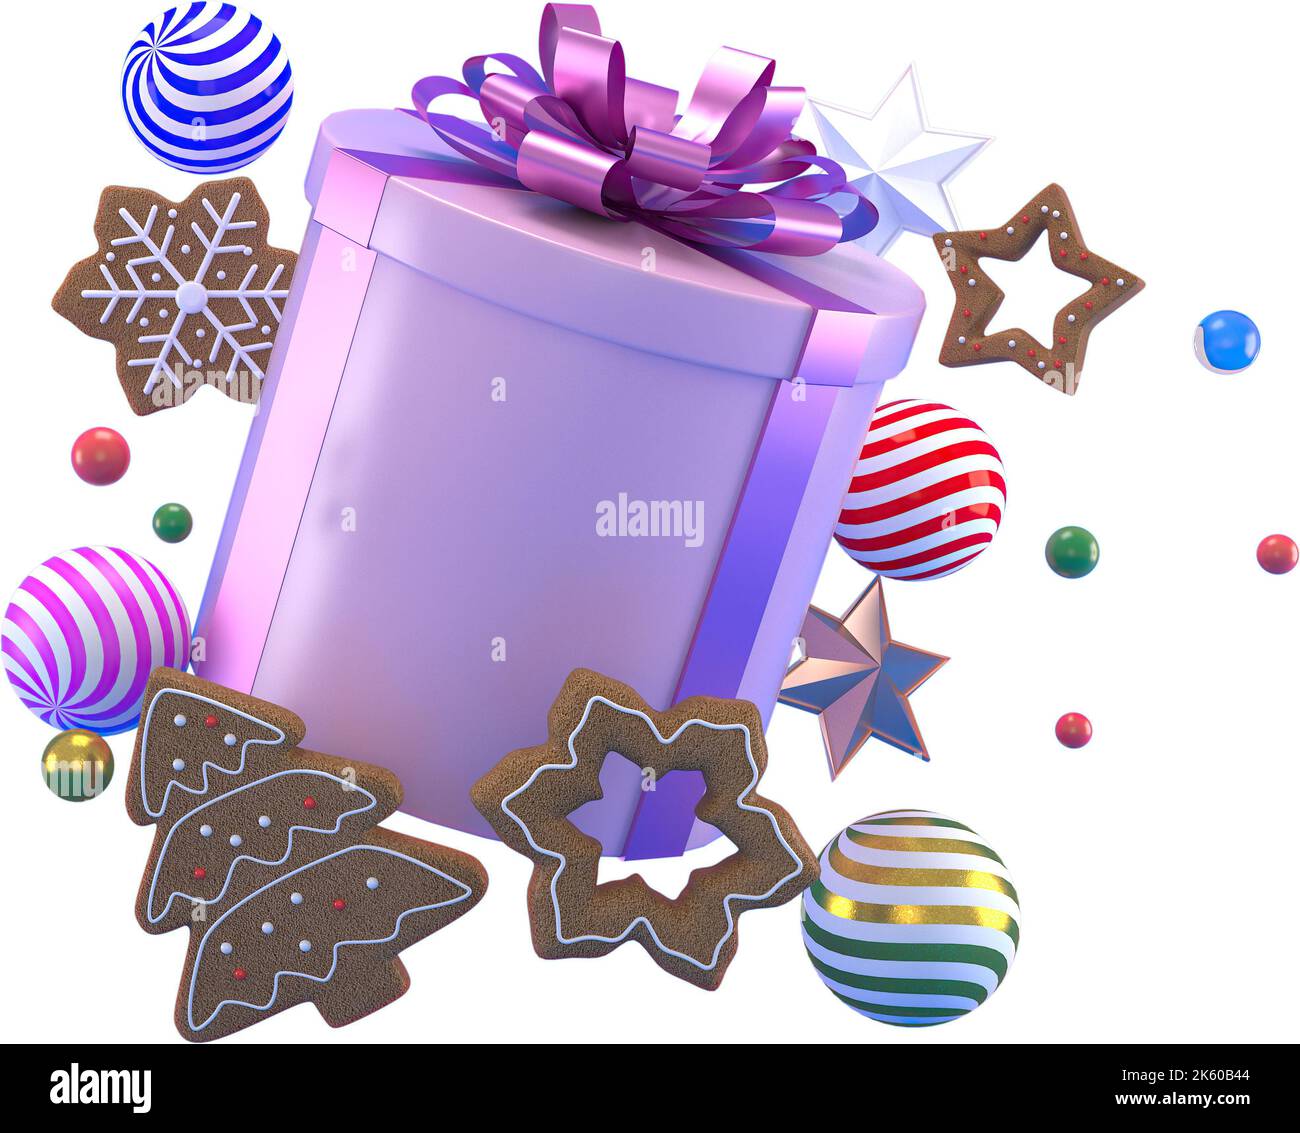 3d Rendering Christmas or new year elements background with decorative balls, star, snow and gif box. Colorful gifts for holidays. Modern design. Isol Stock Photo